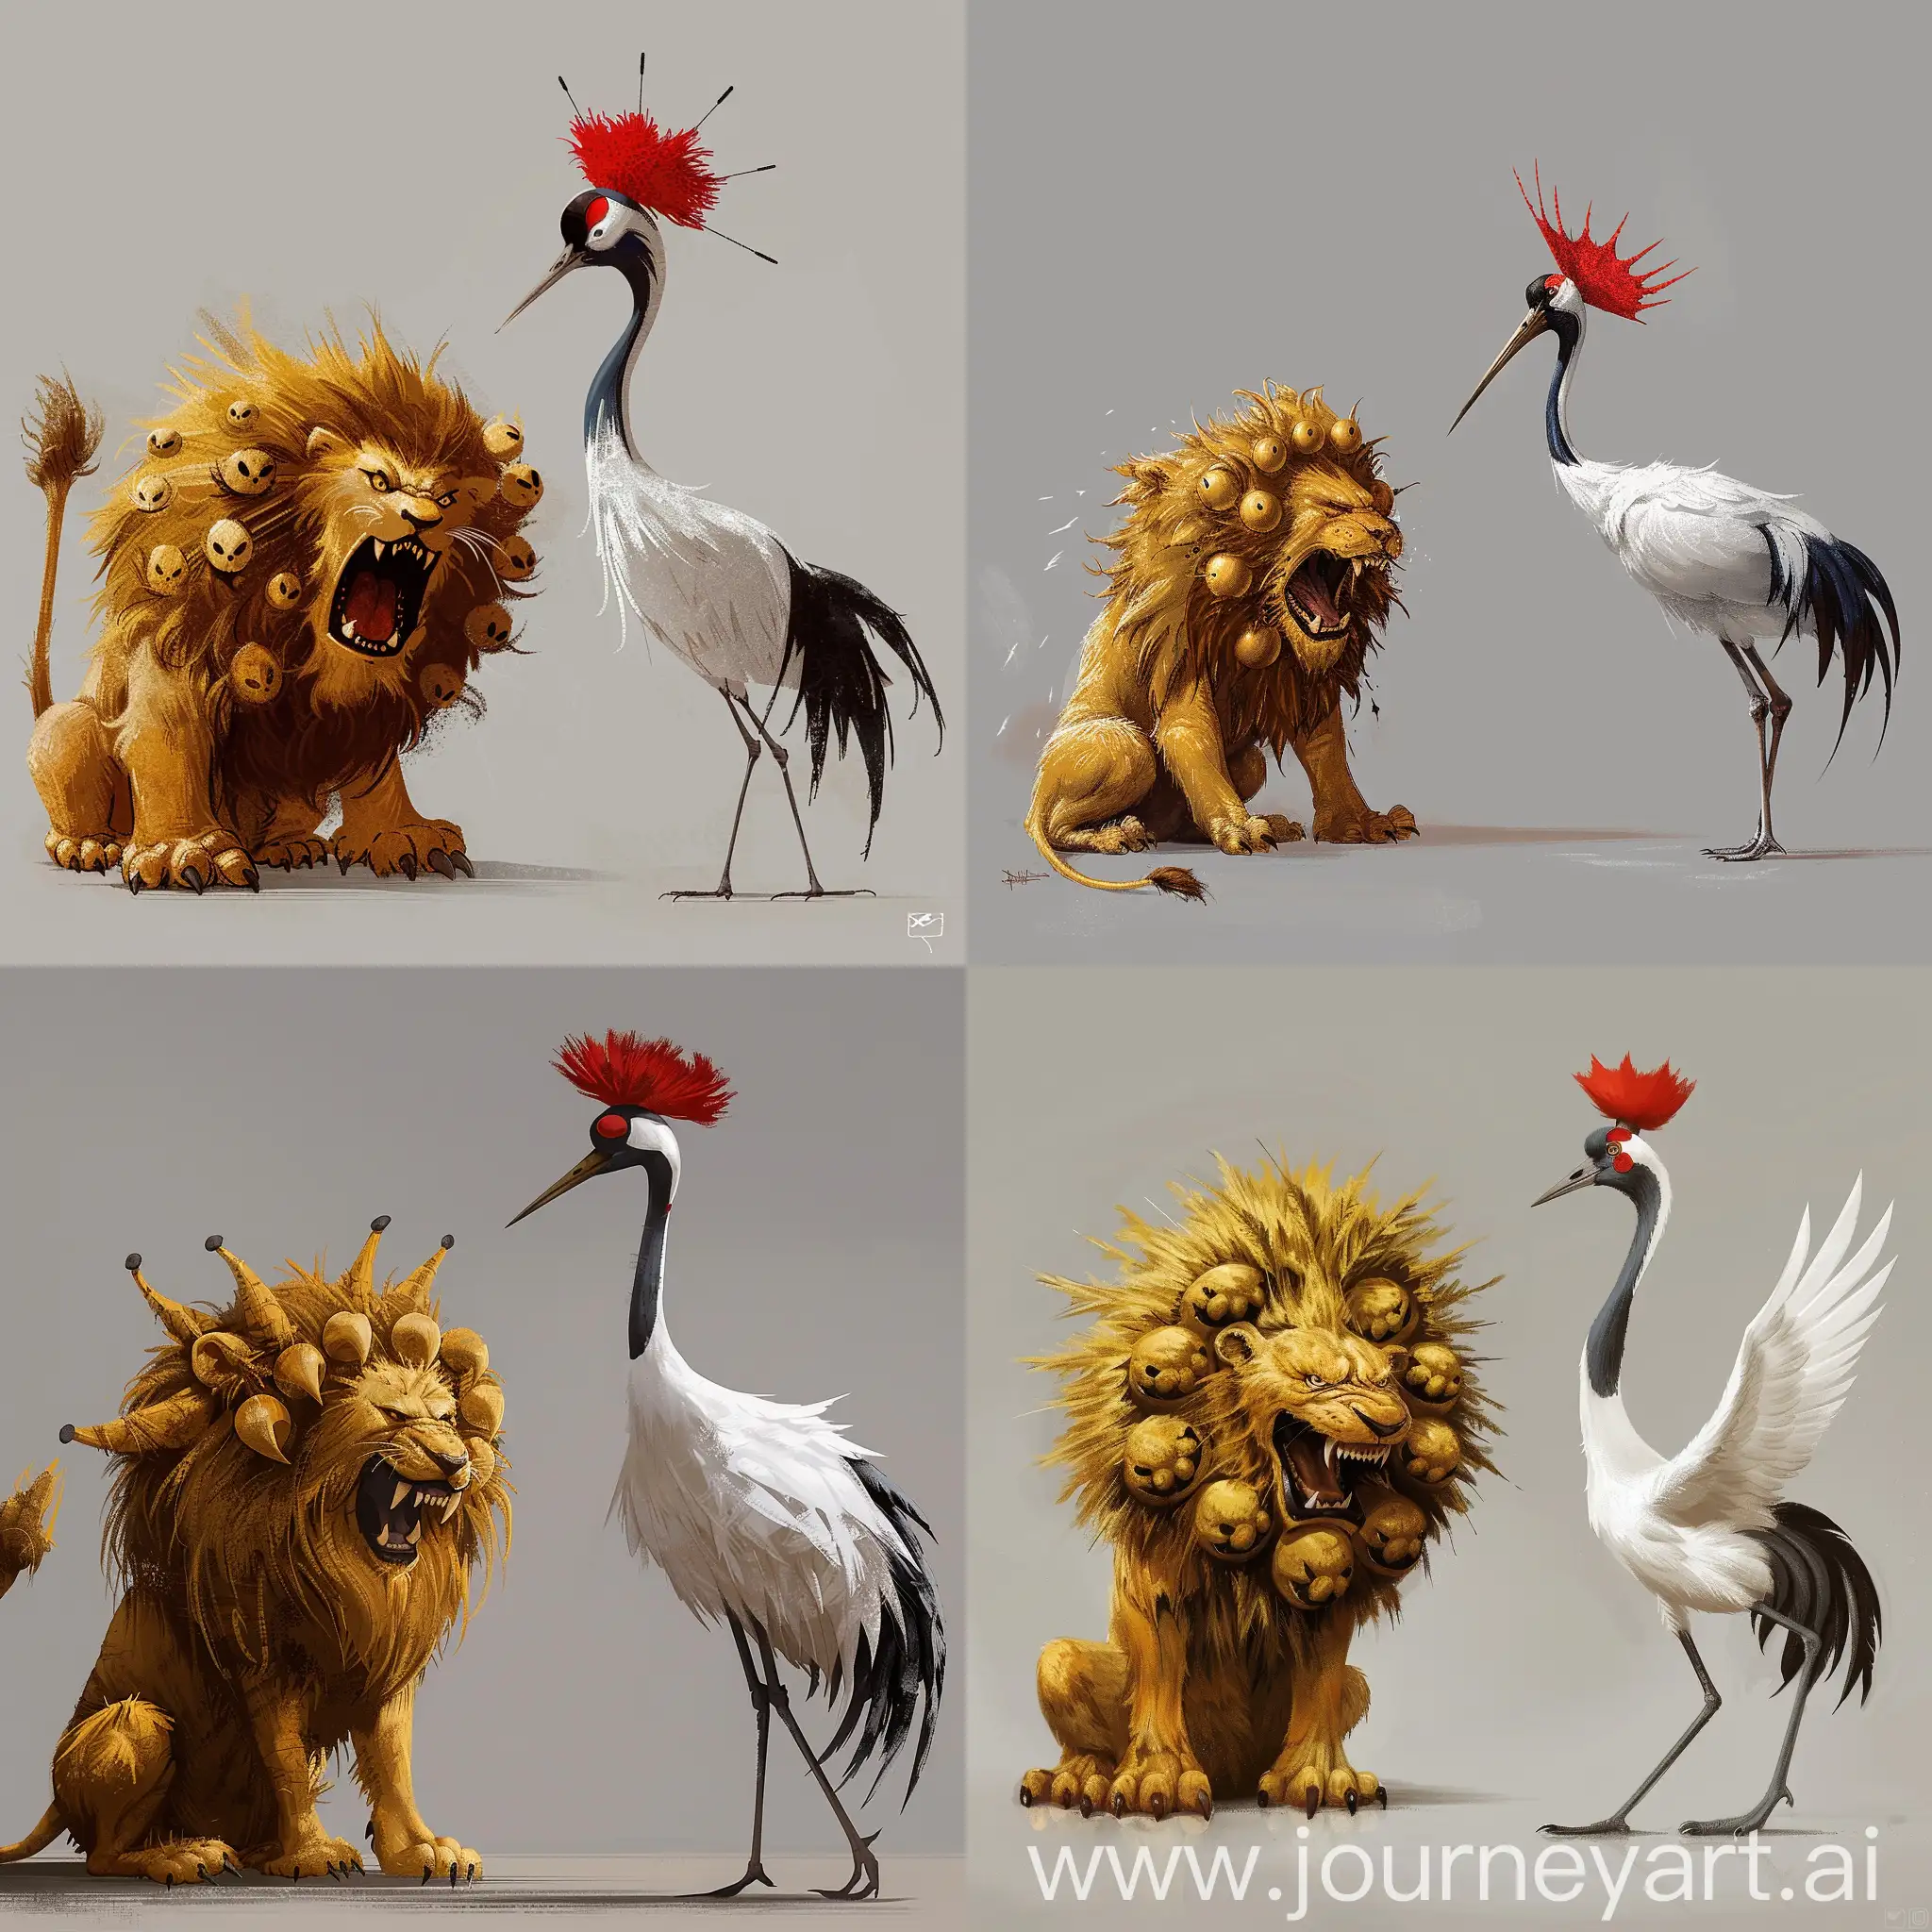 a furry yellow brown color nine-headed lion is crouching on the left side, it is angry,

meanwhile, a red-crowned crane with white feather is on the right side,

the background is pure gray color without anything else,